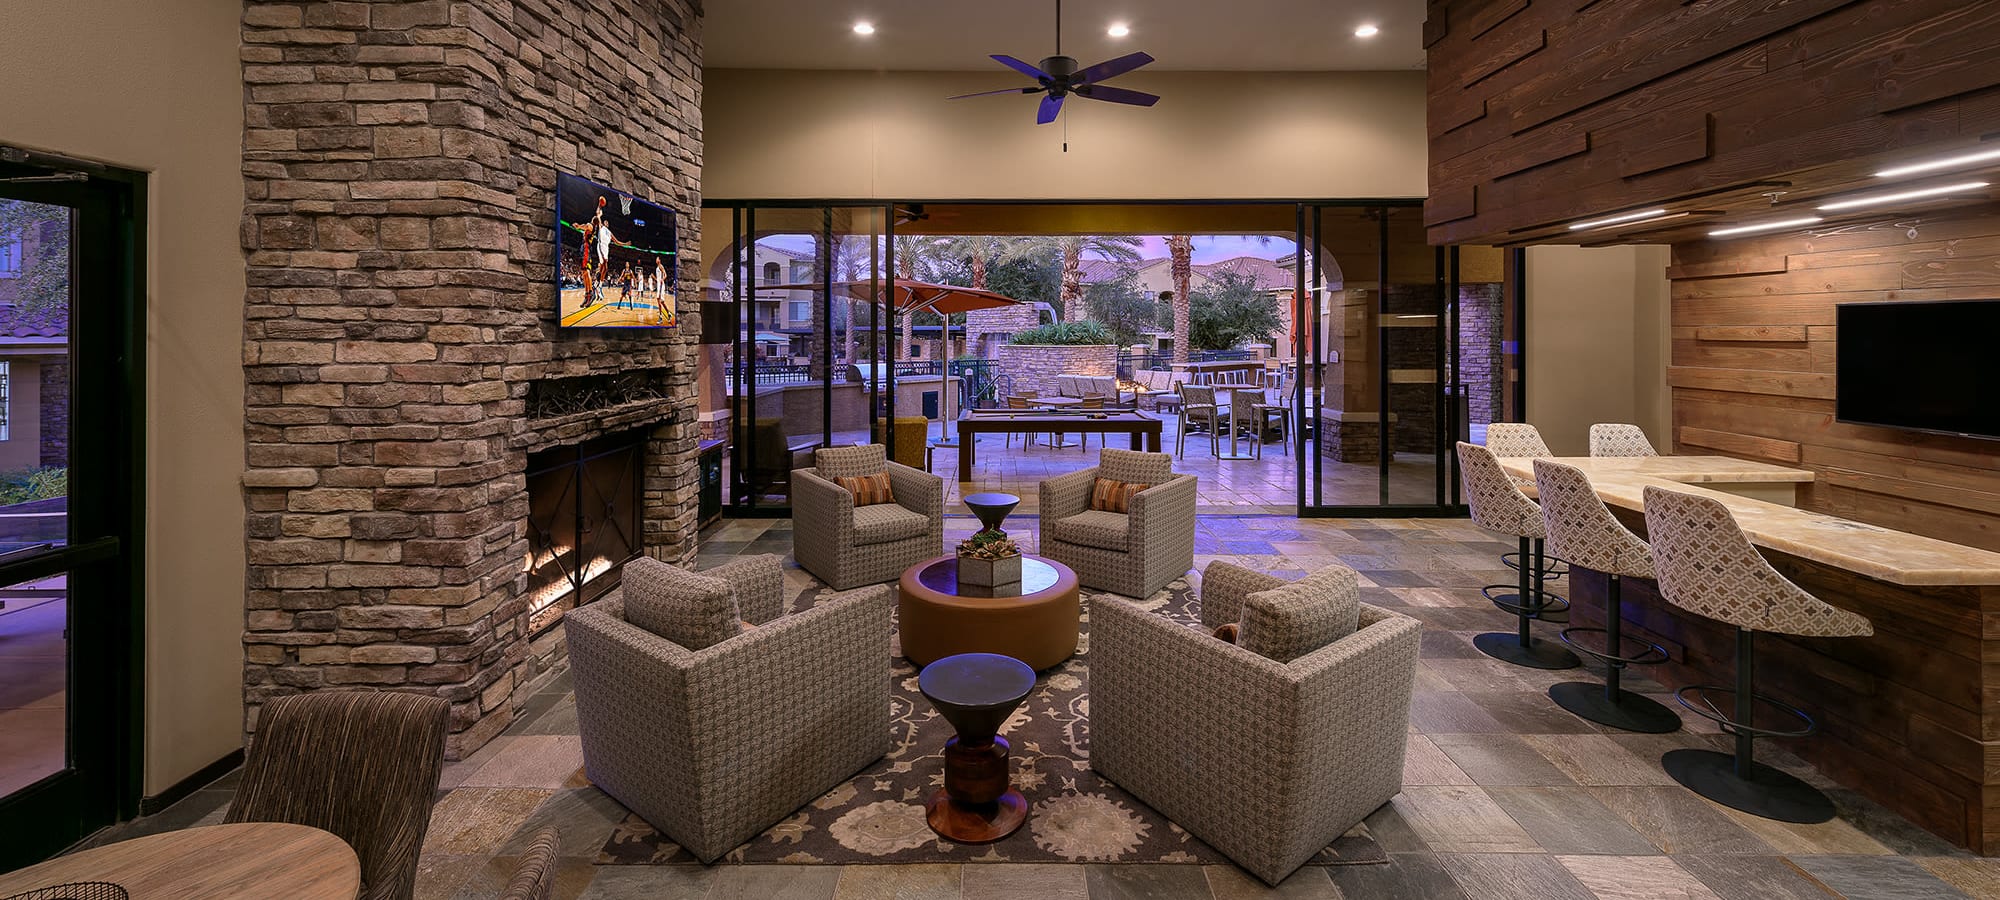 Resident clubhouse at Stone Oaks in Chandler, Arizona